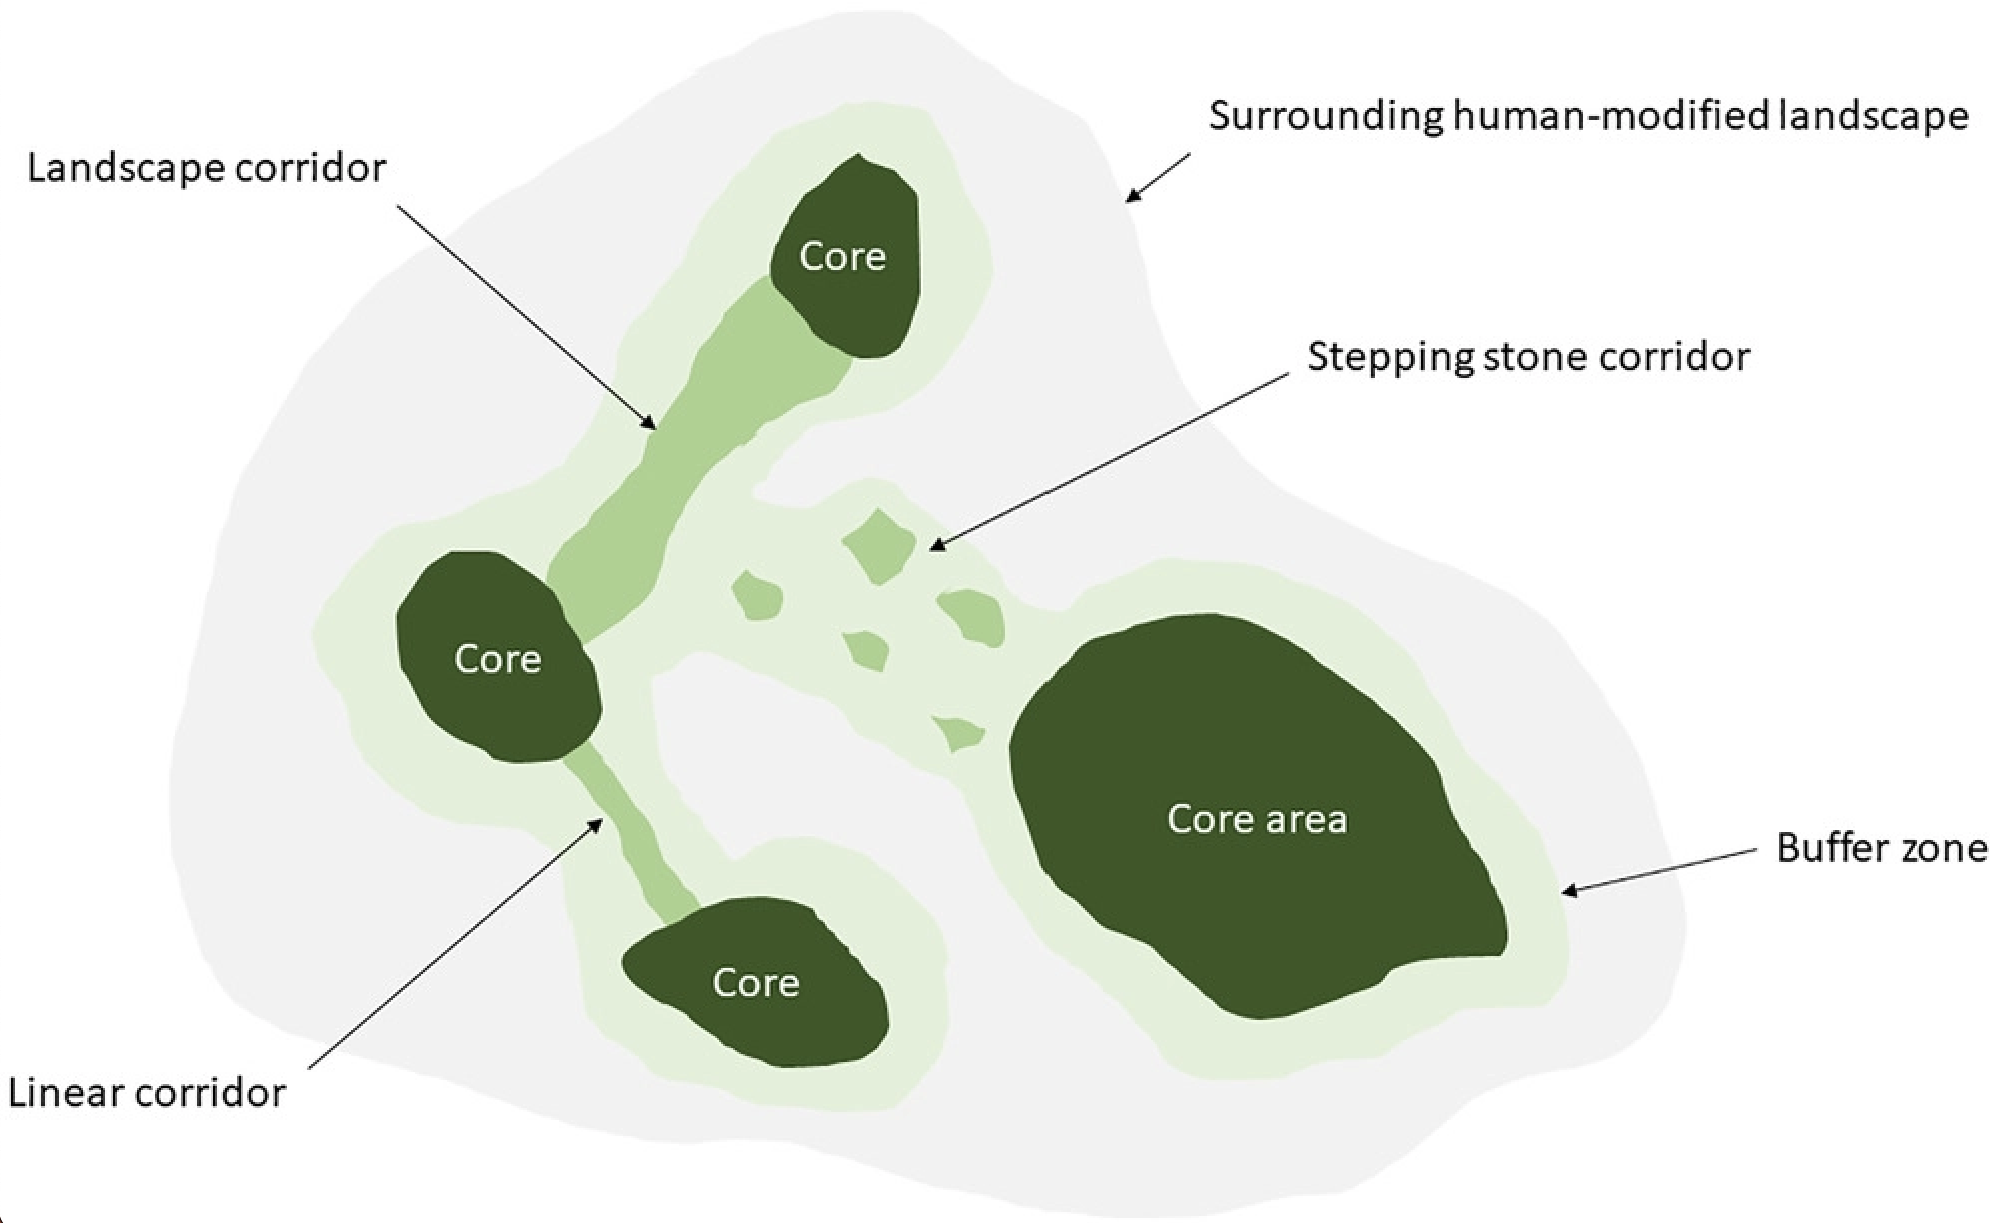 The image is a graphic showing the §Cs model of rewilding.